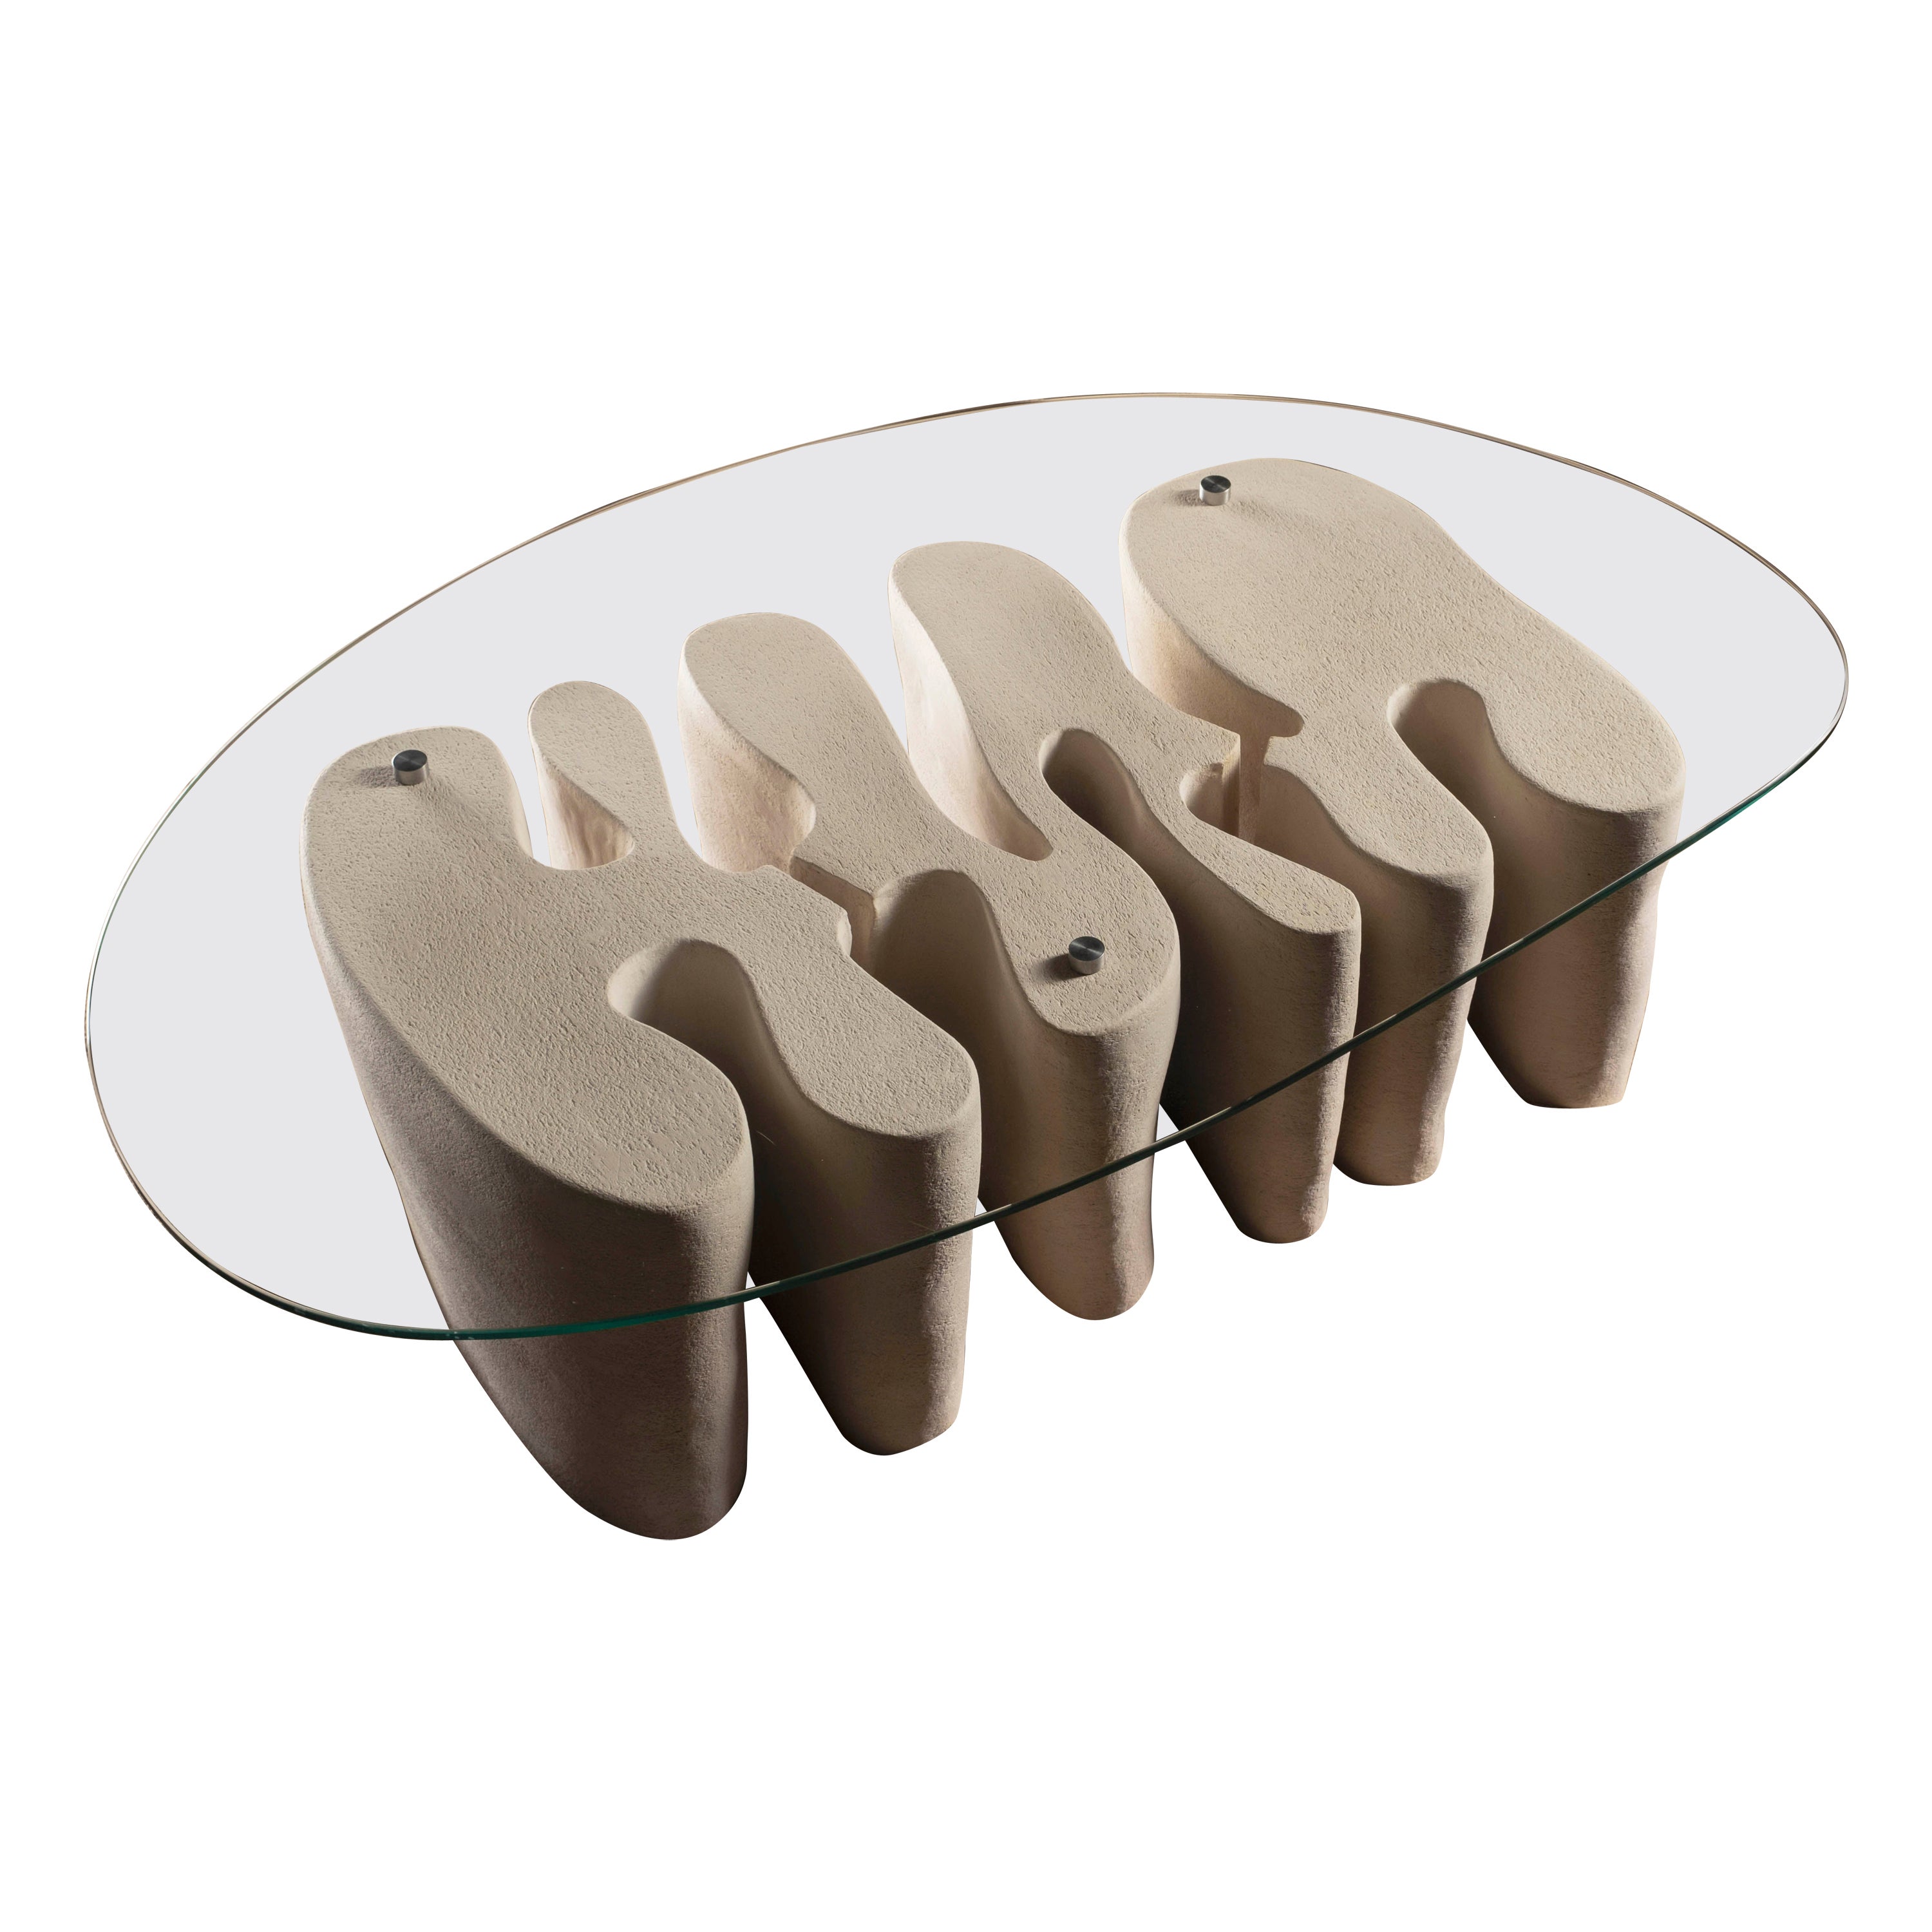 Mitochondria Low Table by Isin Sezgi Avci For Sale